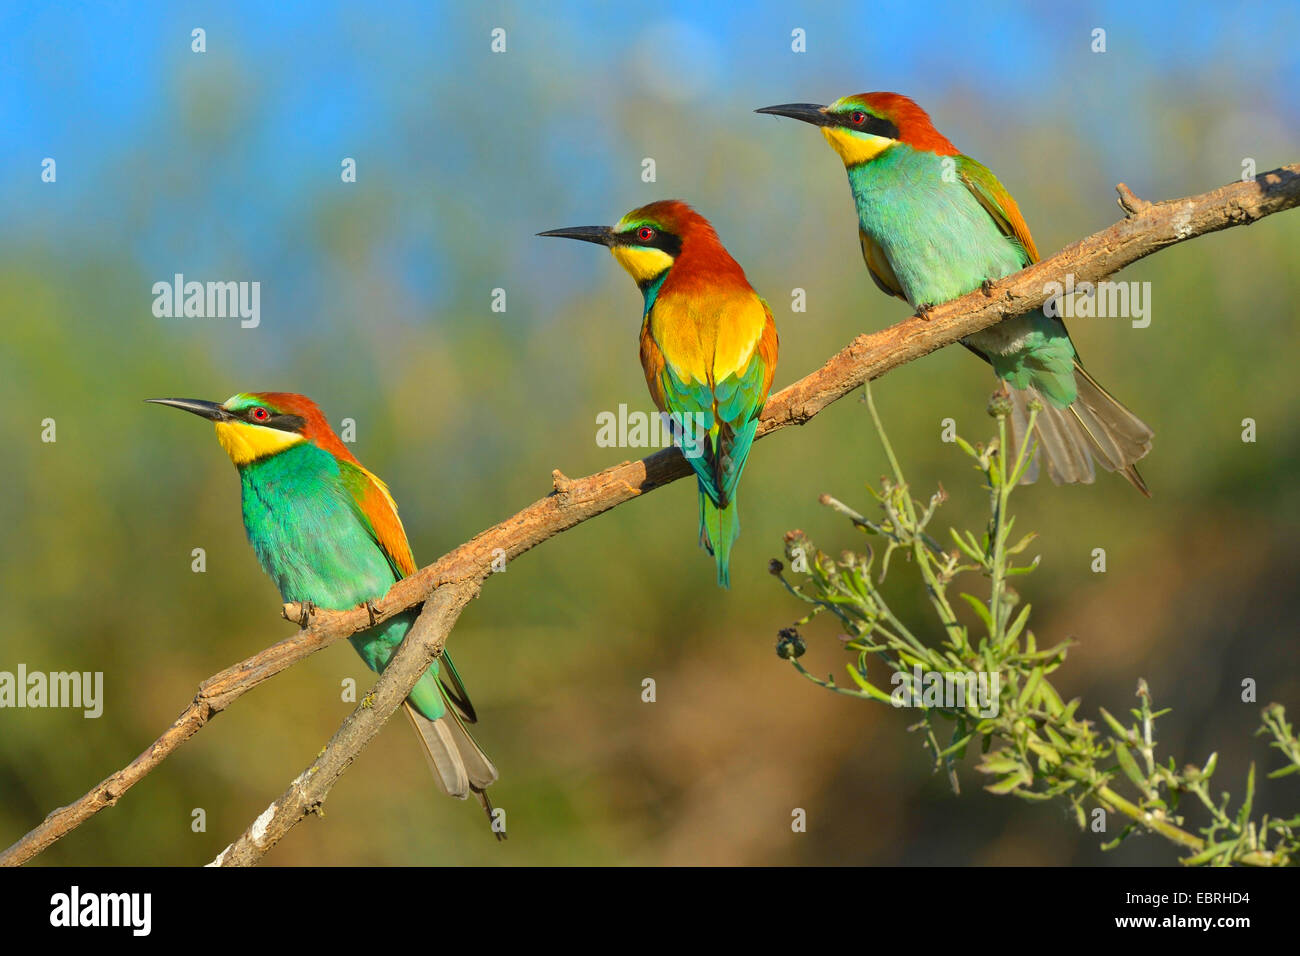 European bee eater (Merops apiaster), three bee eaters on a branch in the morning sun, Hungary Stock Photo